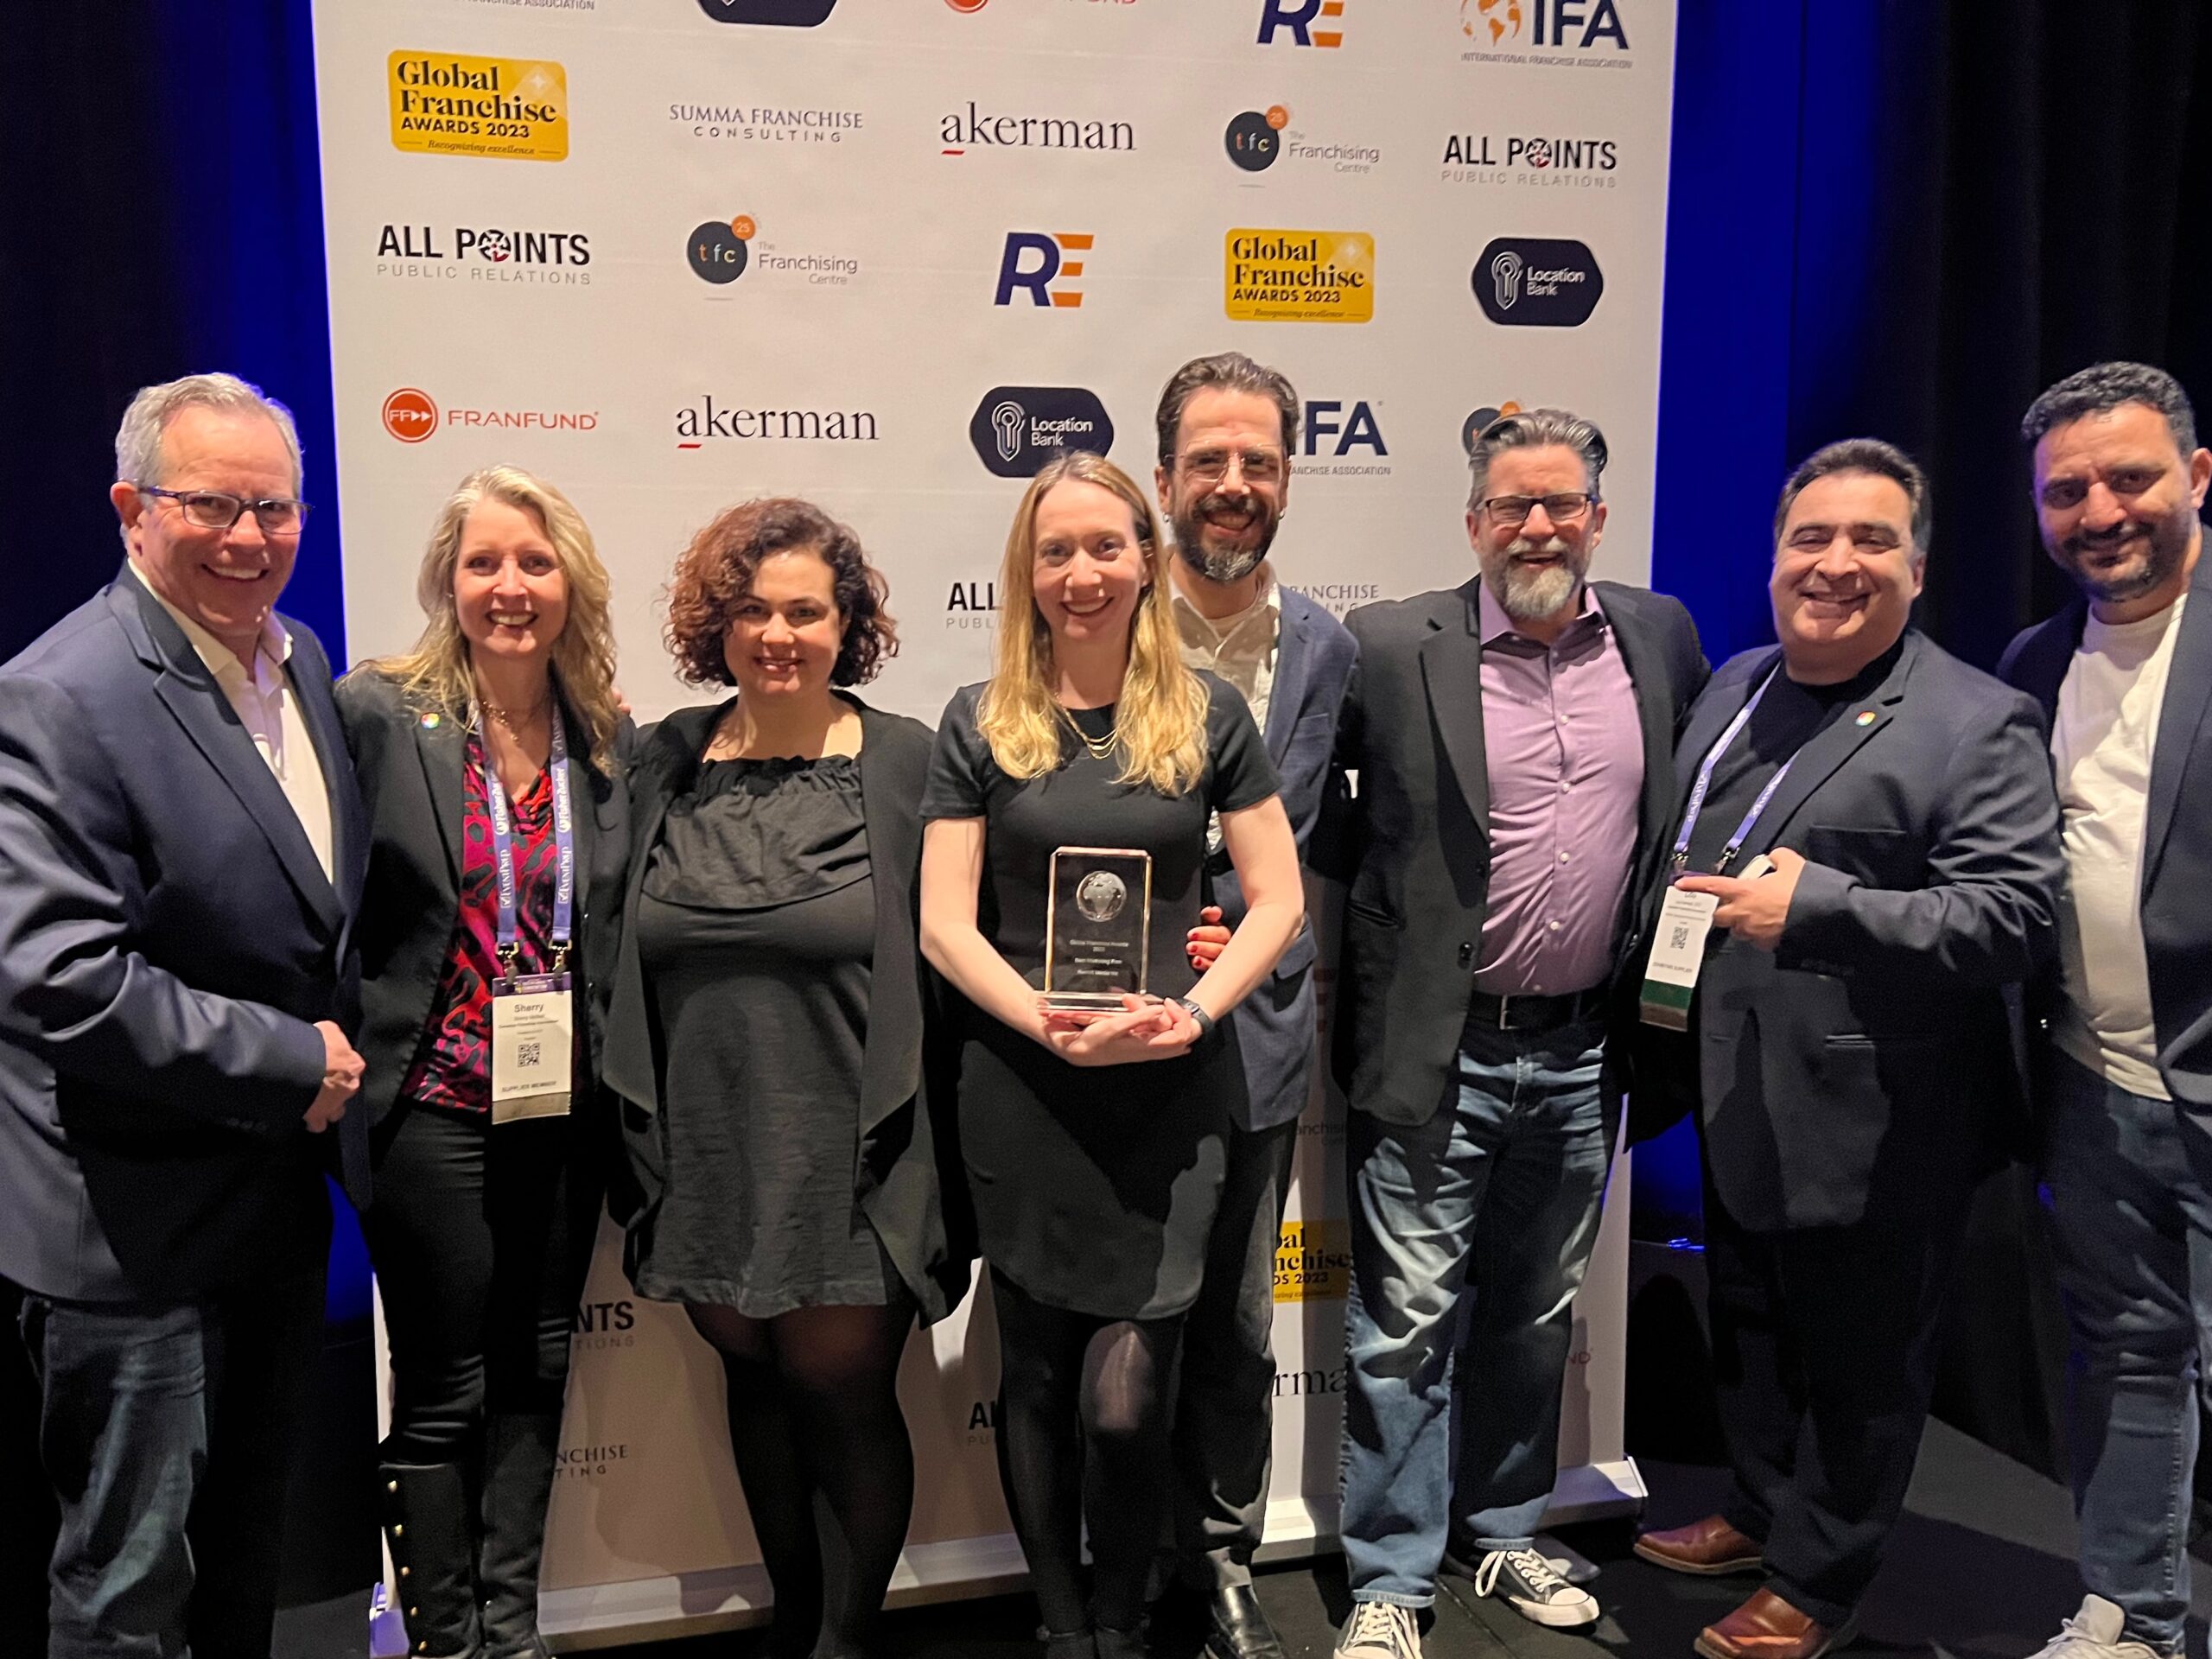 The Reshift Media team, along with the CFA’s Sherry McNeil and Lou Gervasi, accepting the best franchise marketing firm award at the 2023 Global Franchise Awards in Las Vegas.